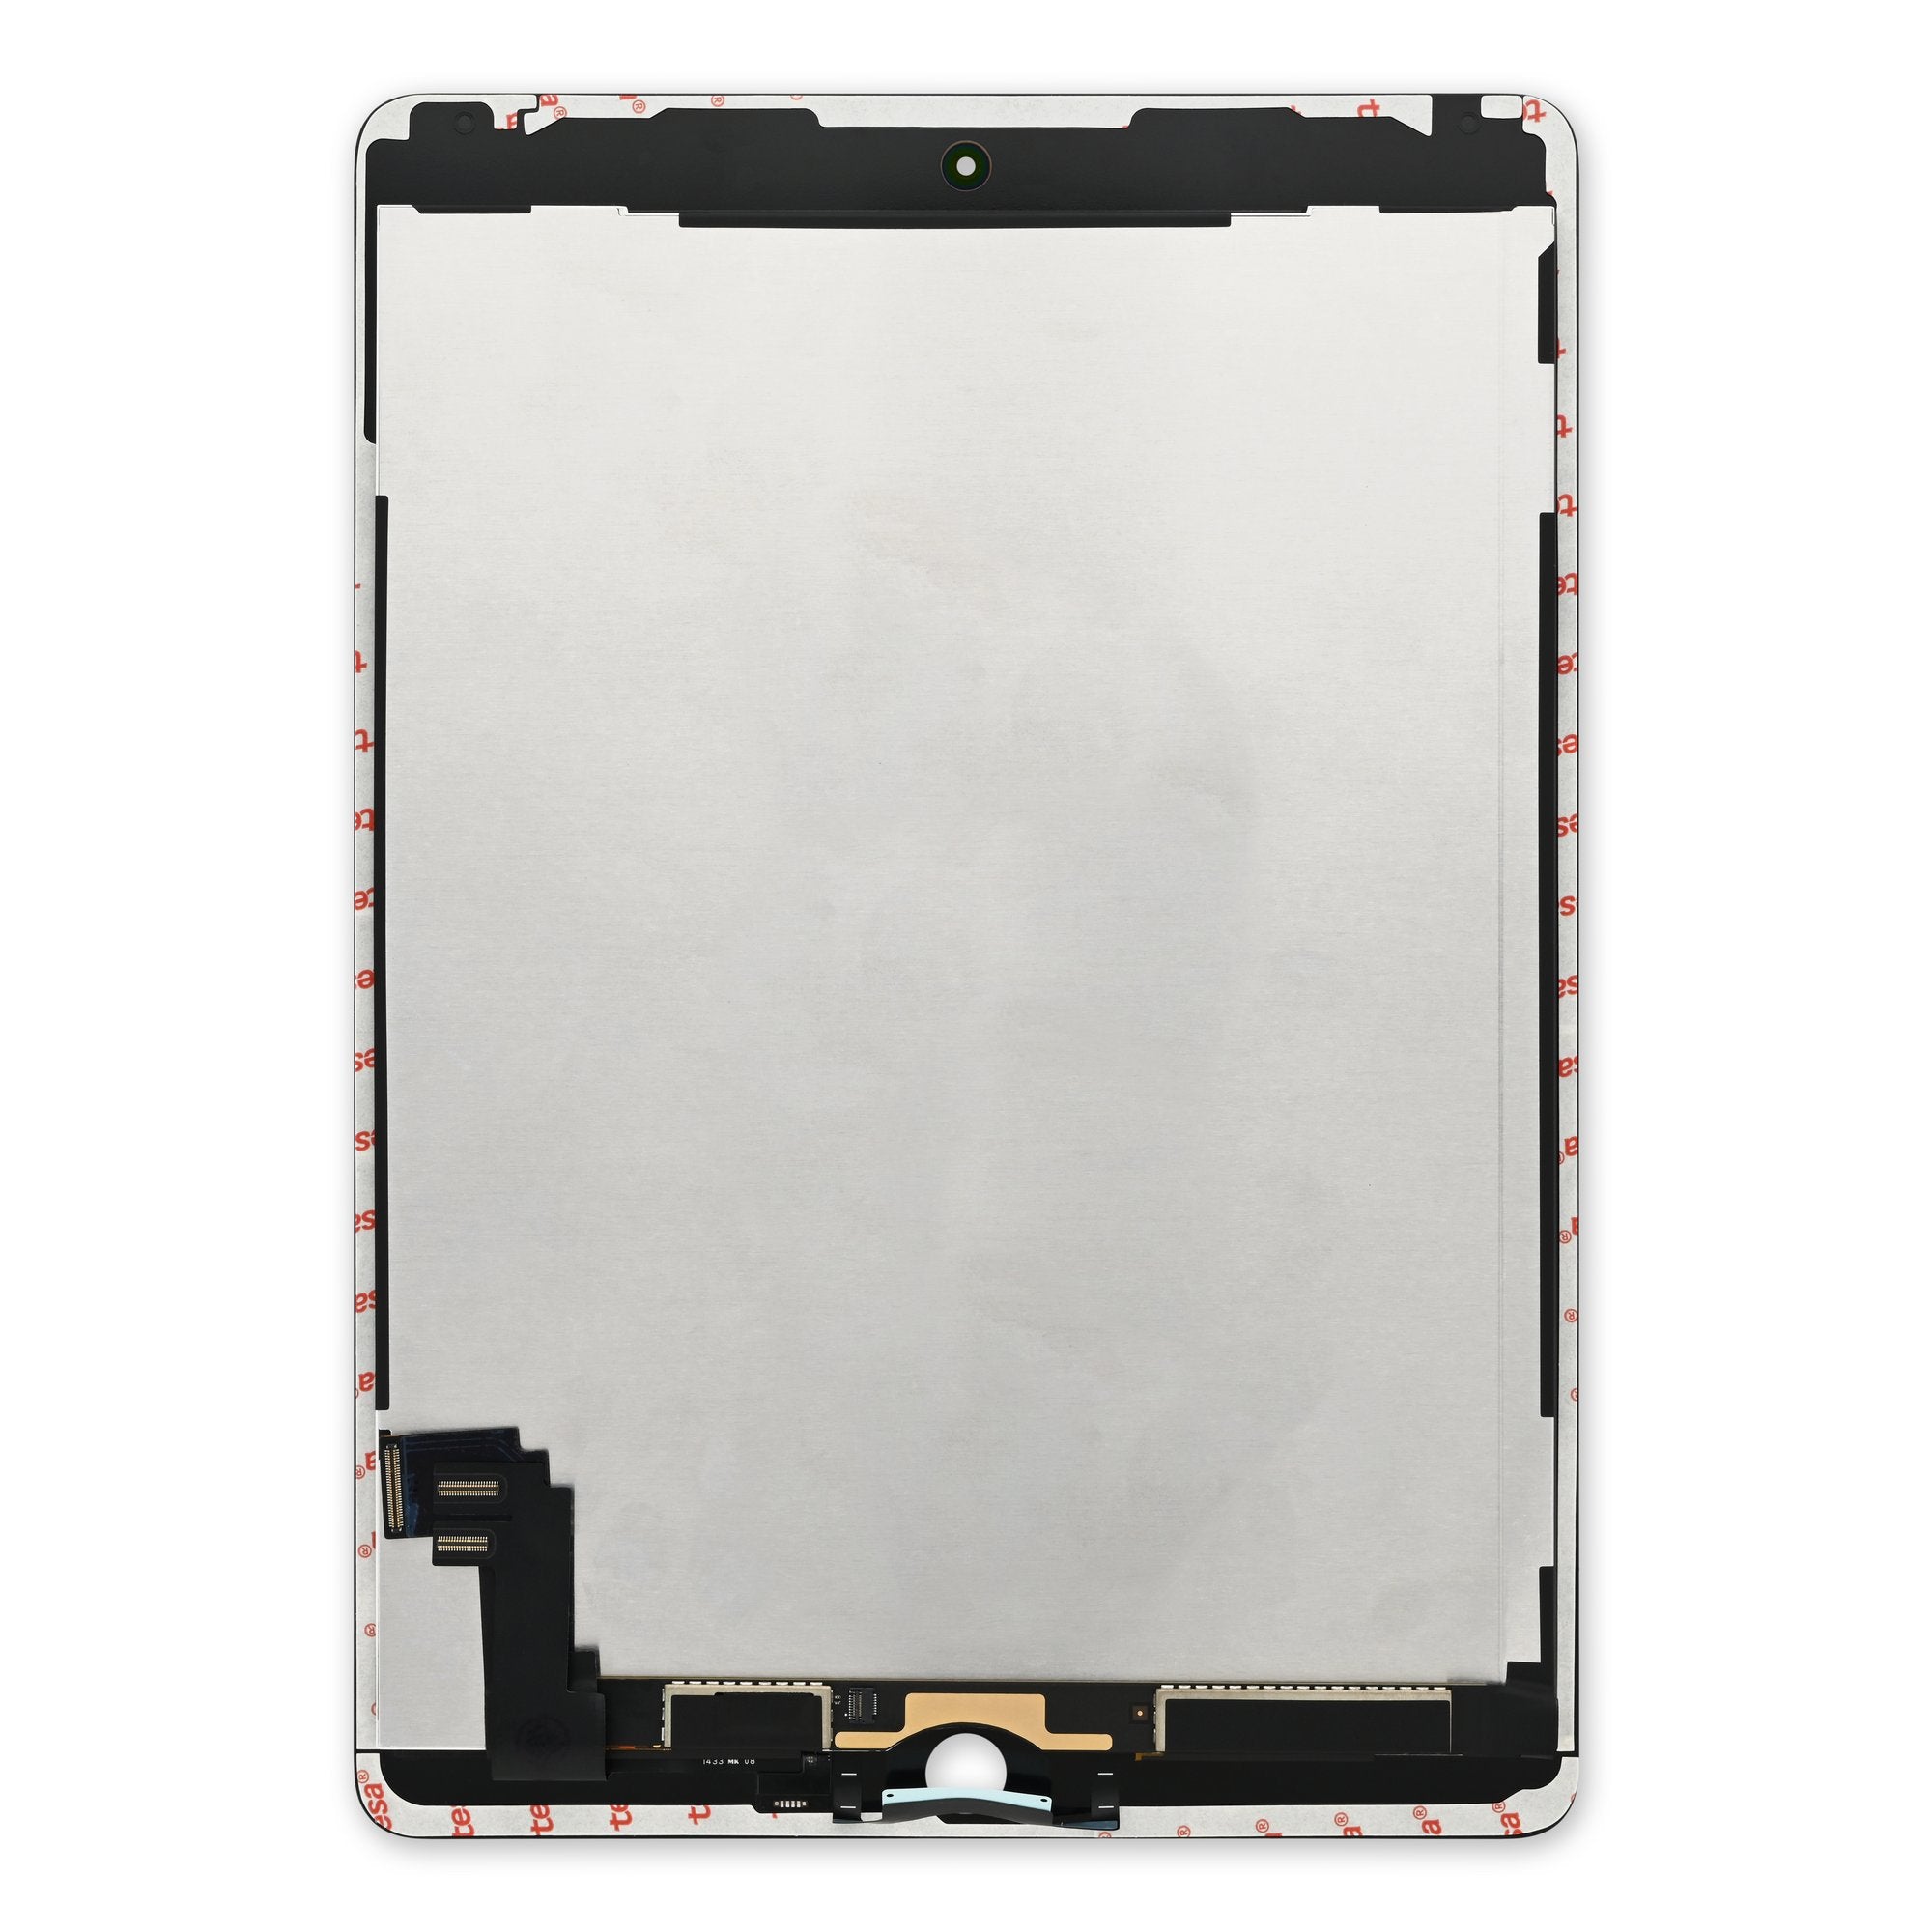 A-MIND For IPad Air 2 A1566 A1567 Touch Digitizer Screen Replacement  Parts,（LCD Not Include，No Home Button） with Screen Protector+Repair  Tools(White)